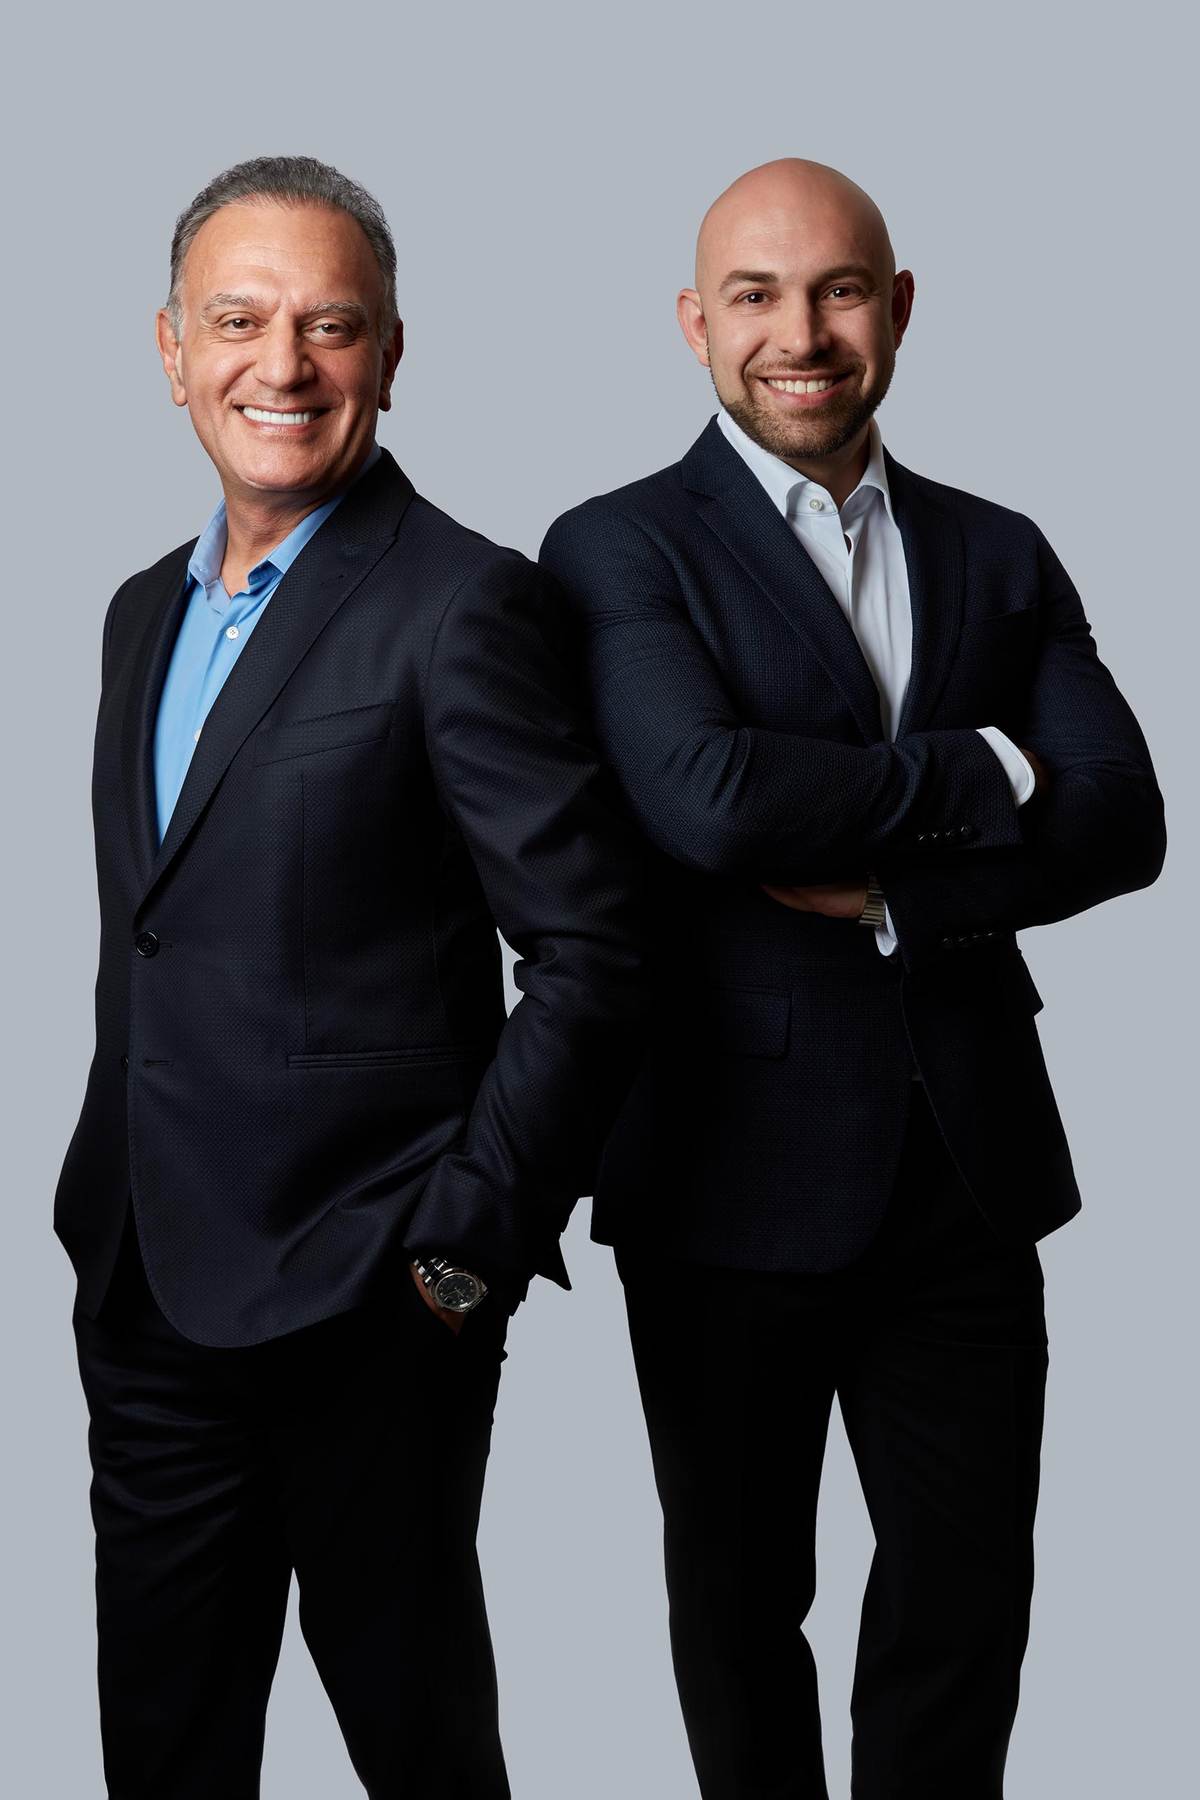 corporate_portrait_cover_males_professional_highend_clean_studio_dorit_thies_femaile_photographerLB_DT_v2_Dion_Health_Untitled Session2727 copy.jpg